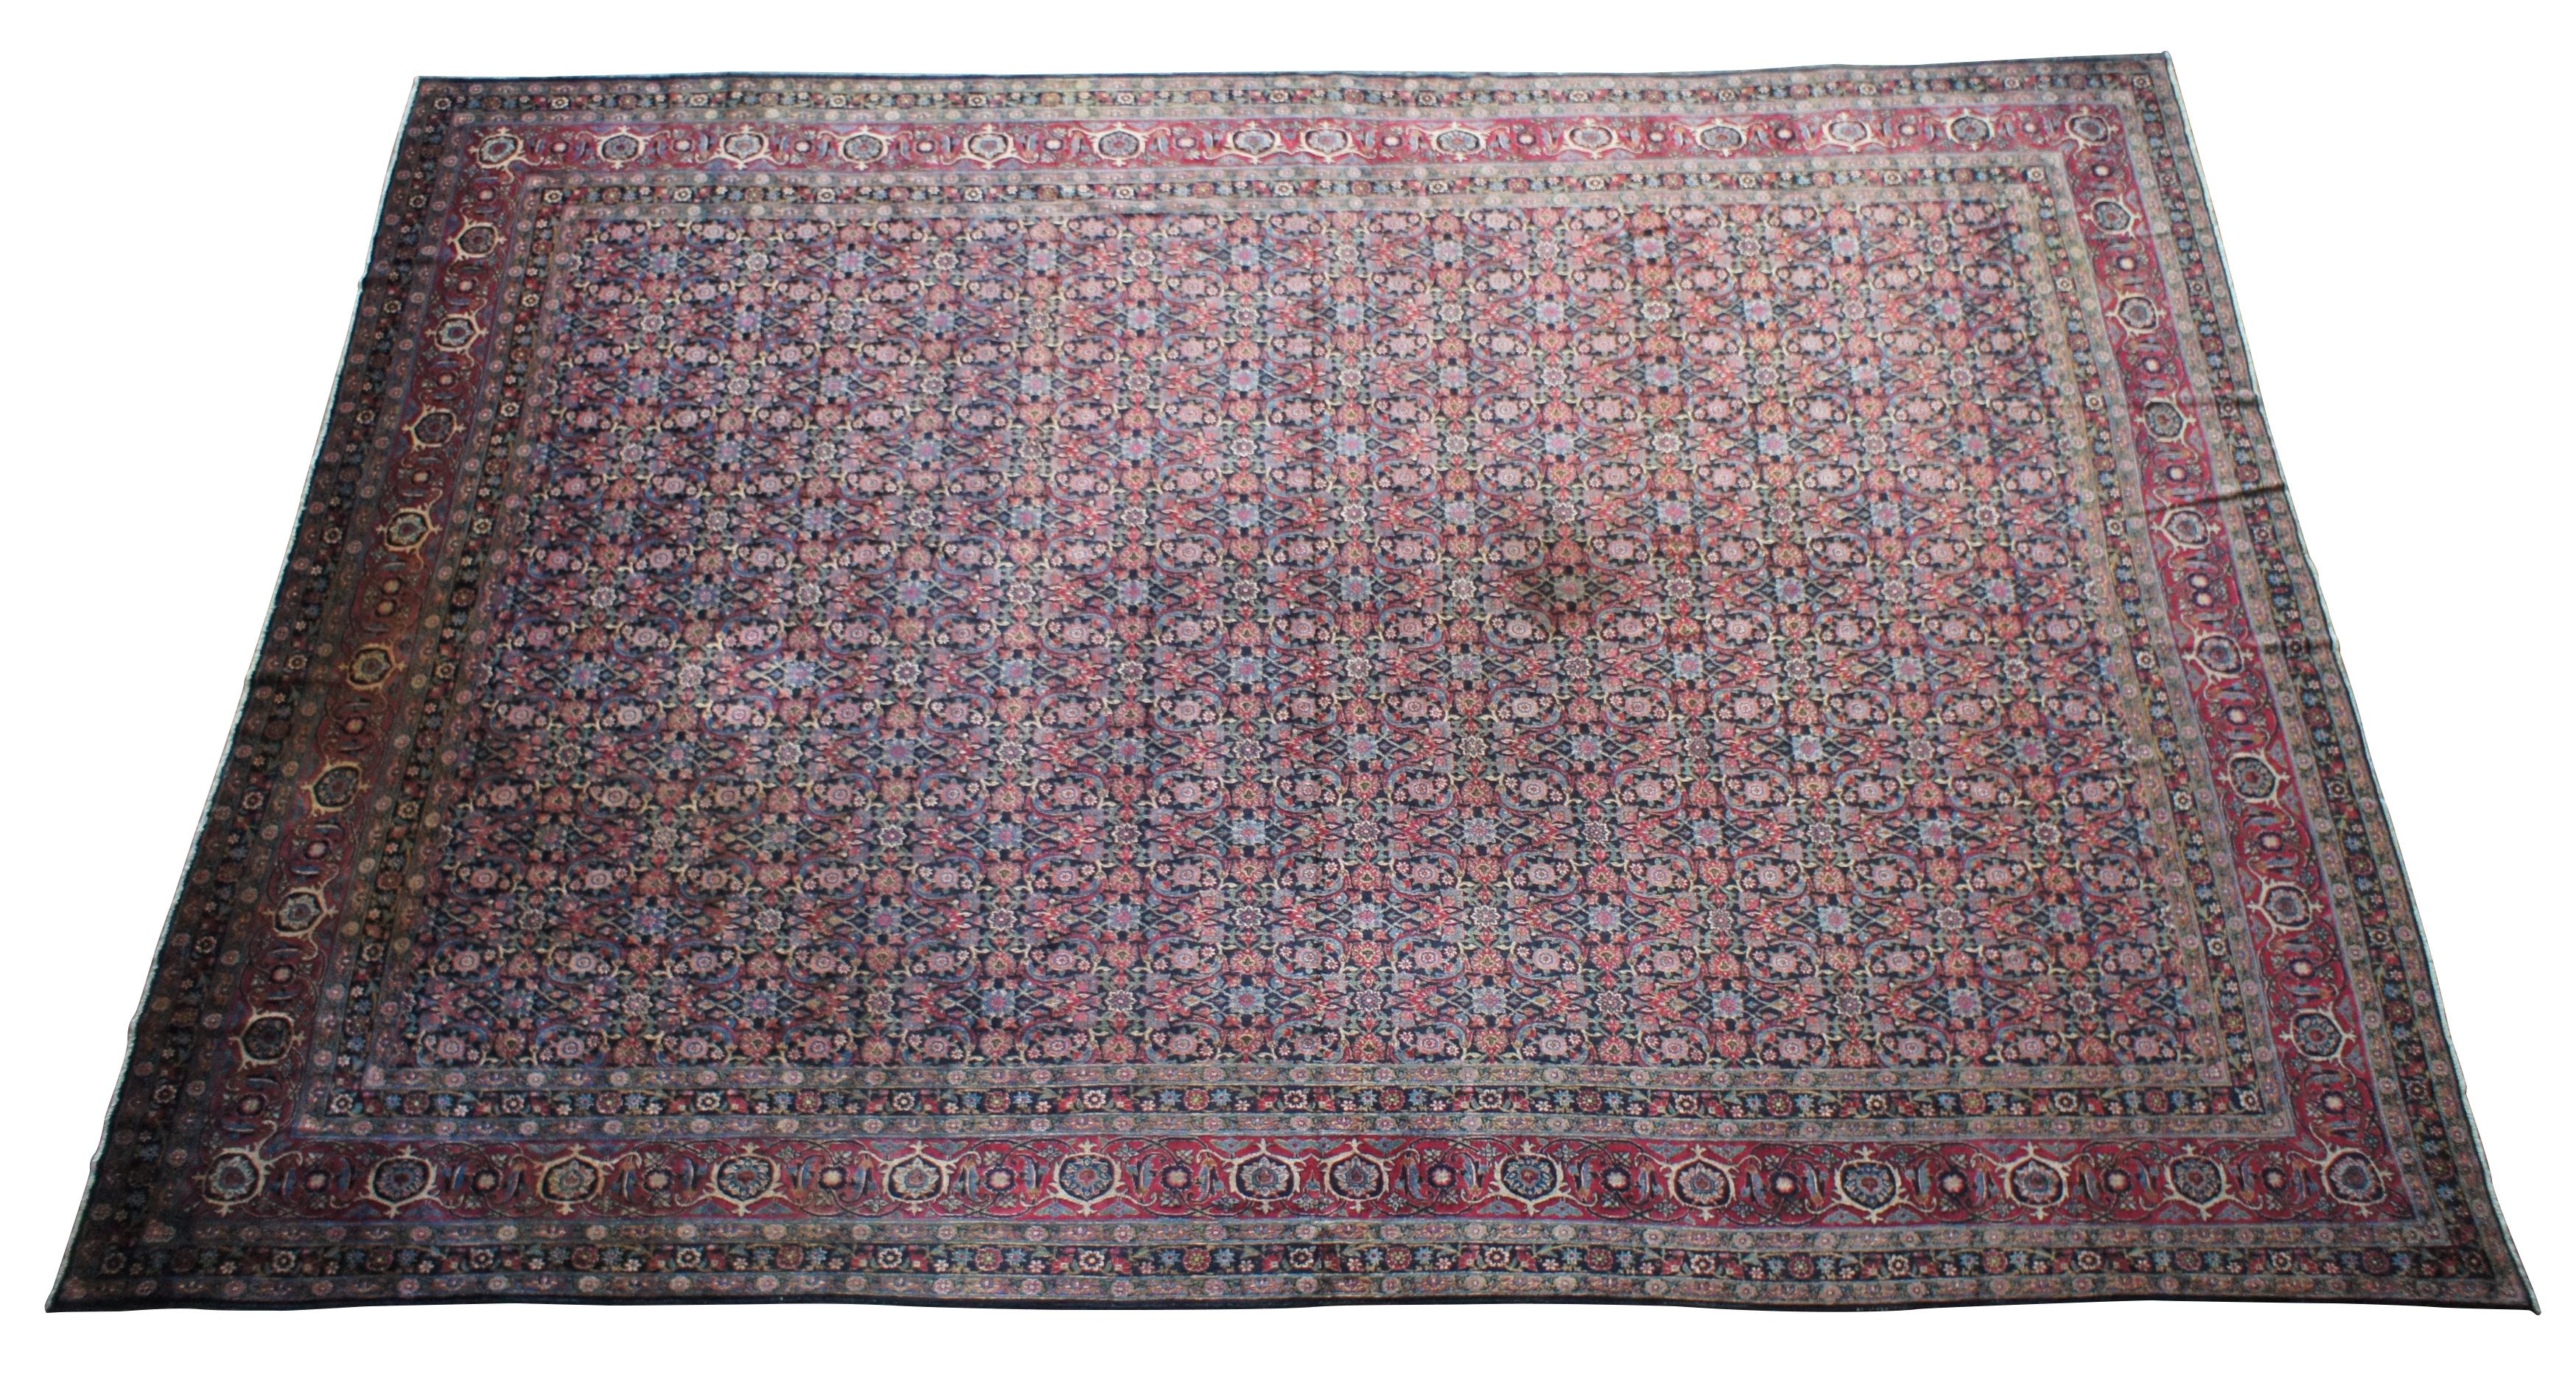 Antique Silk Wool Tabriz Persian Hand Knotted Geometric Bokhara Palace Rug In Good Condition For Sale In Dayton, OH